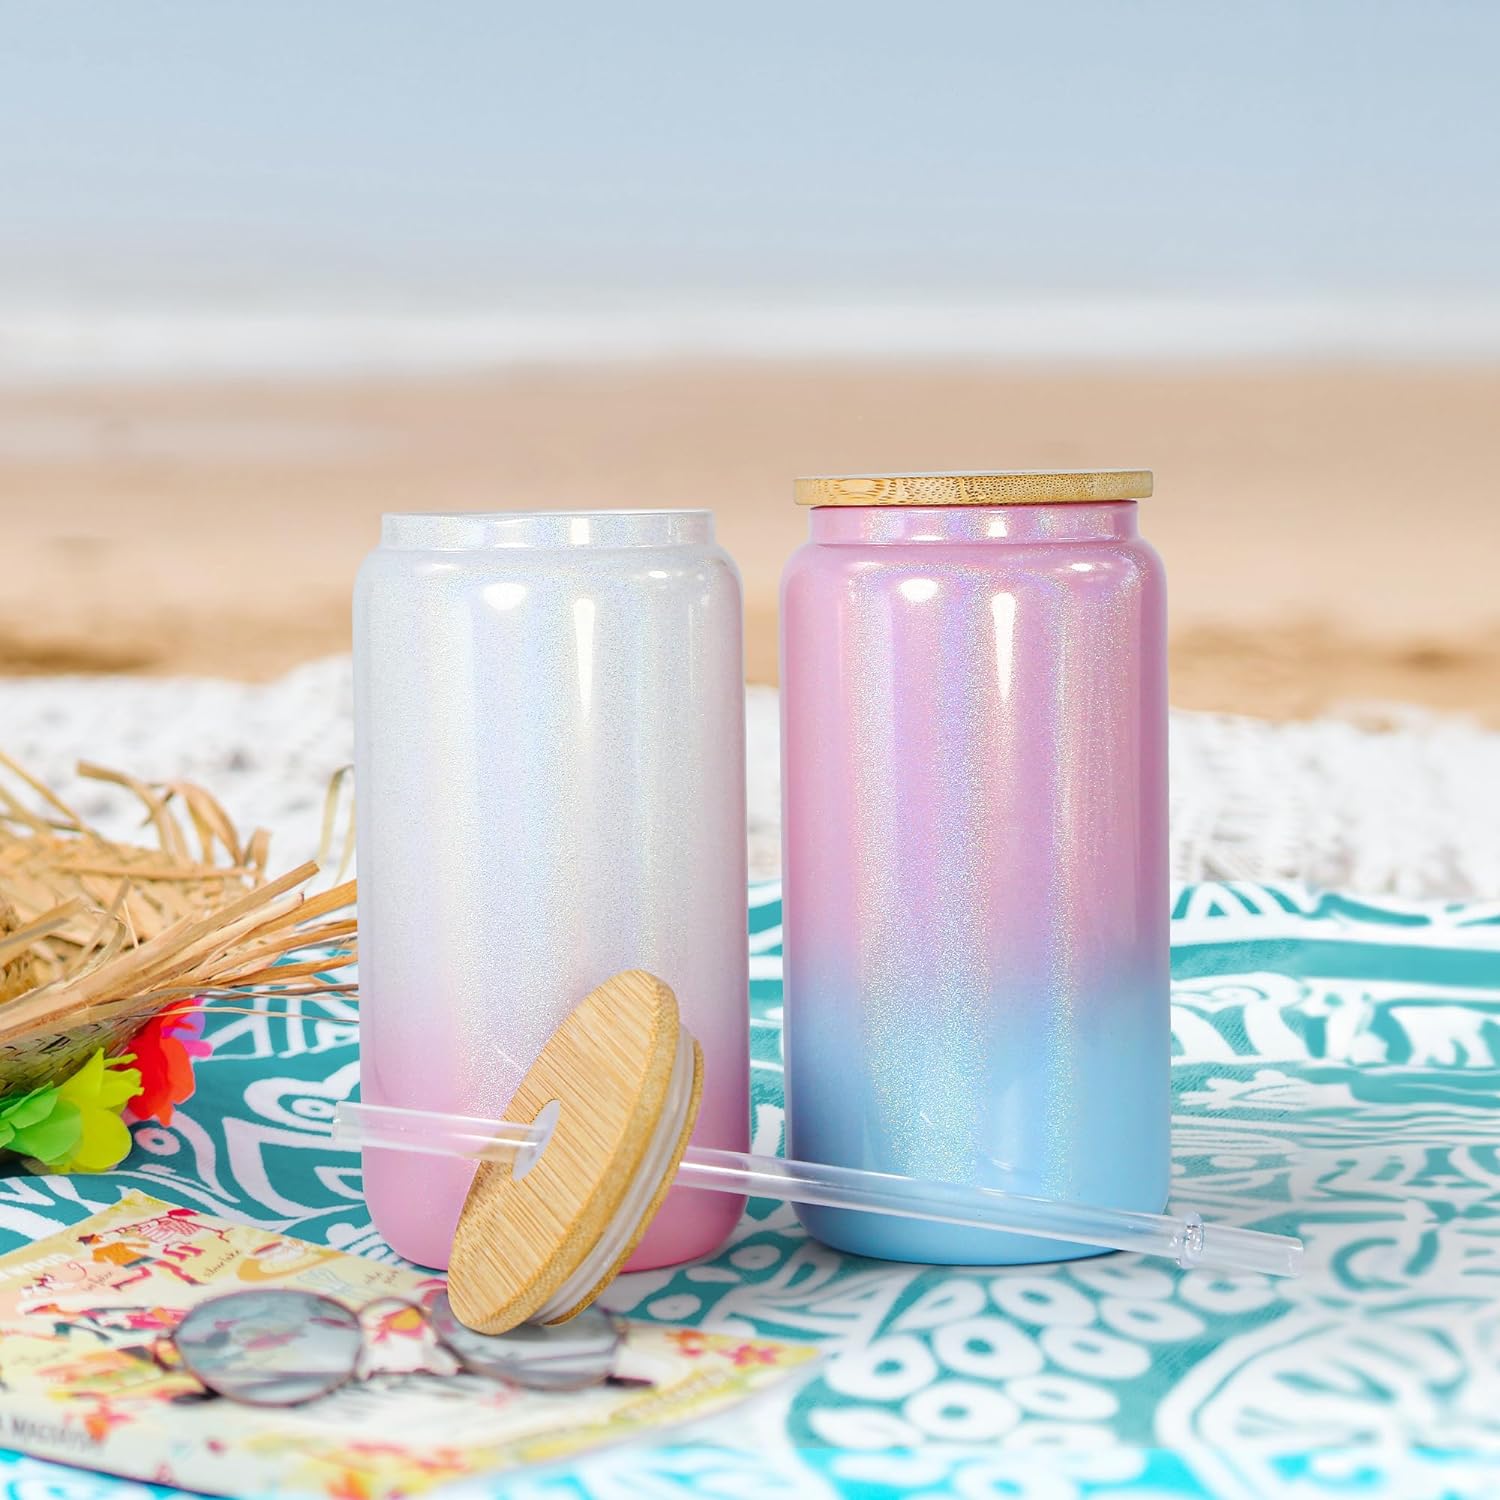 Set of 4 Colors - 16 oz Iridescent Glass Sublimation Tumblers w/ Bamboo Lid